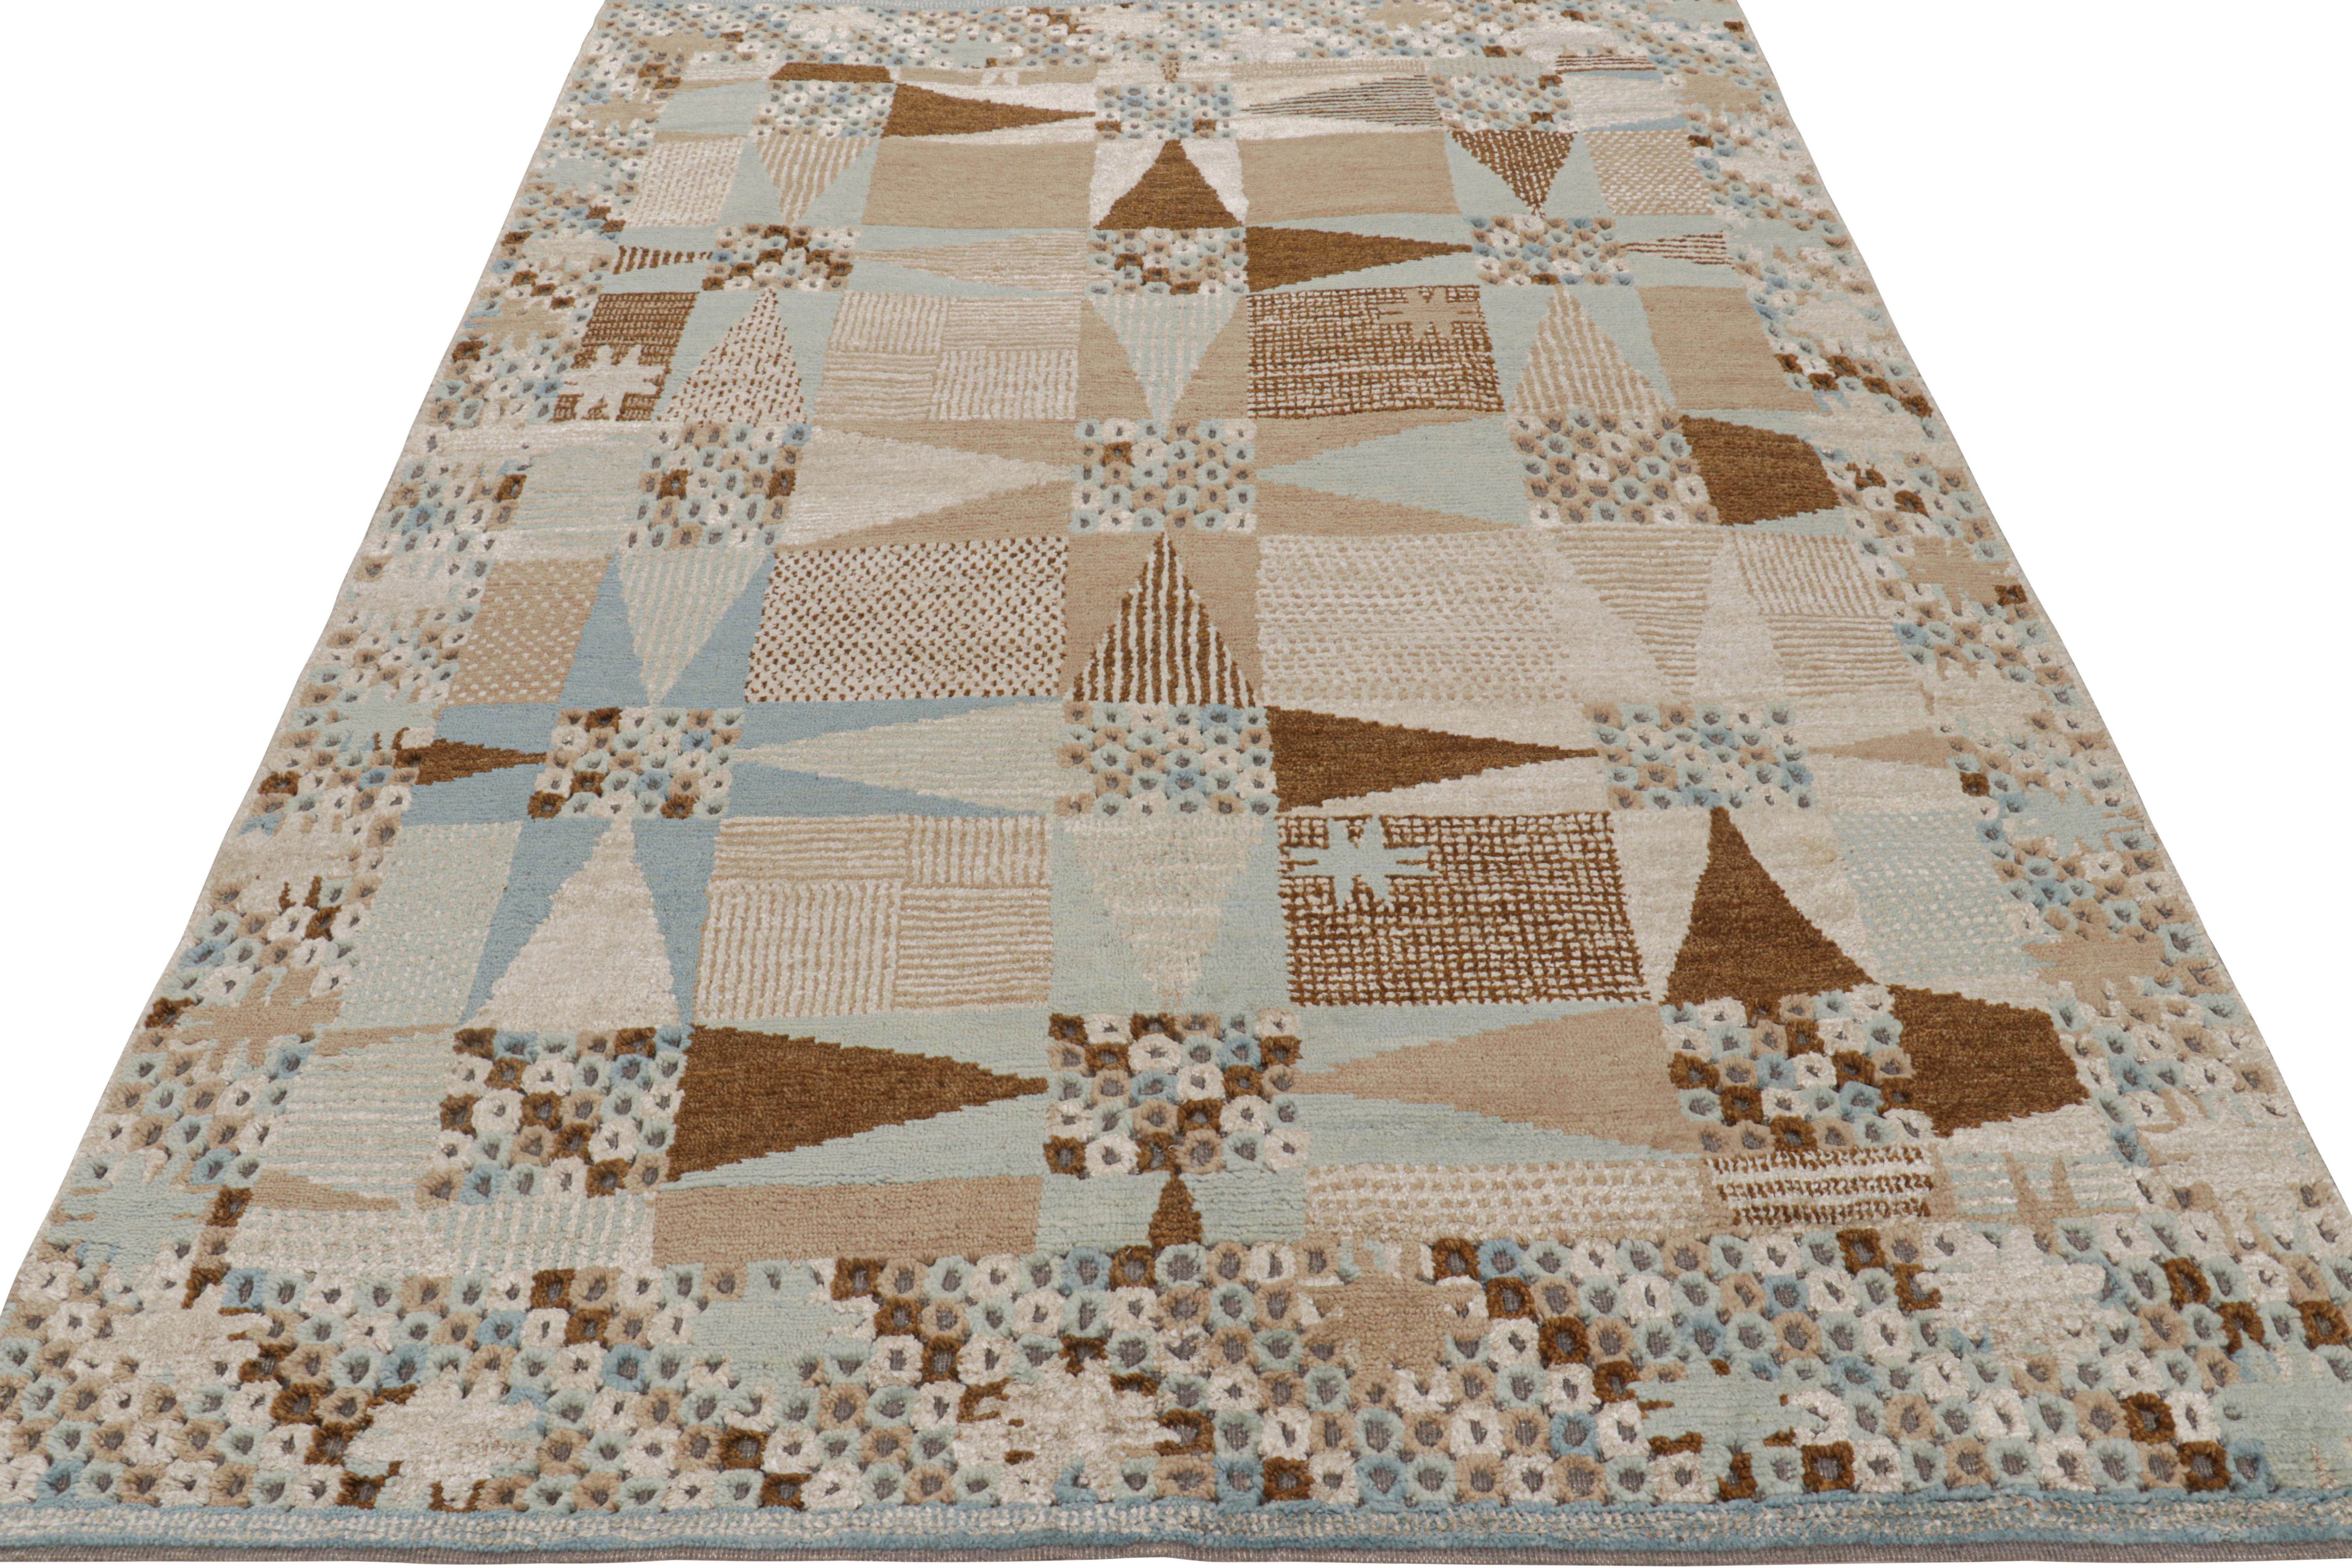 Hand-Knotted Rug & Kilim’s Scandinavian Style Rug in Beige-Brown and Blue Geometric Patterns For Sale